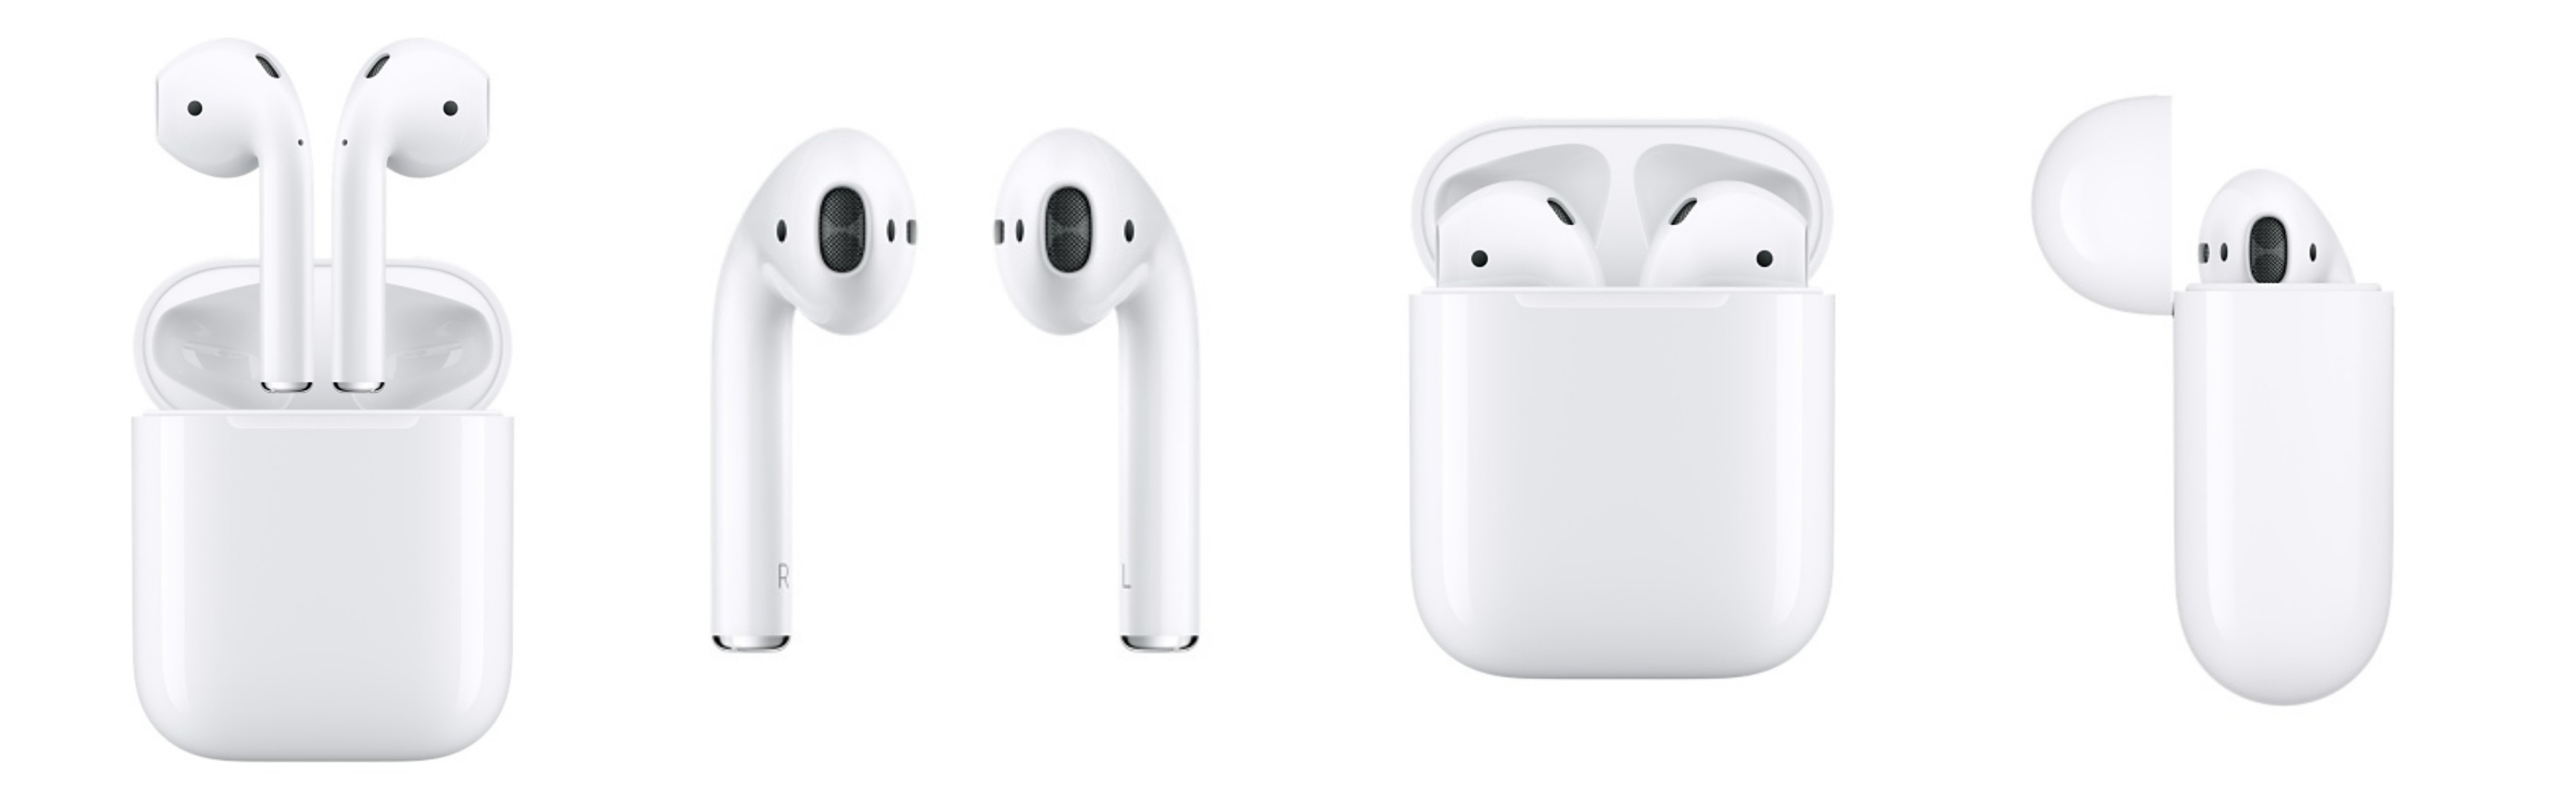 Apple AirPods now released